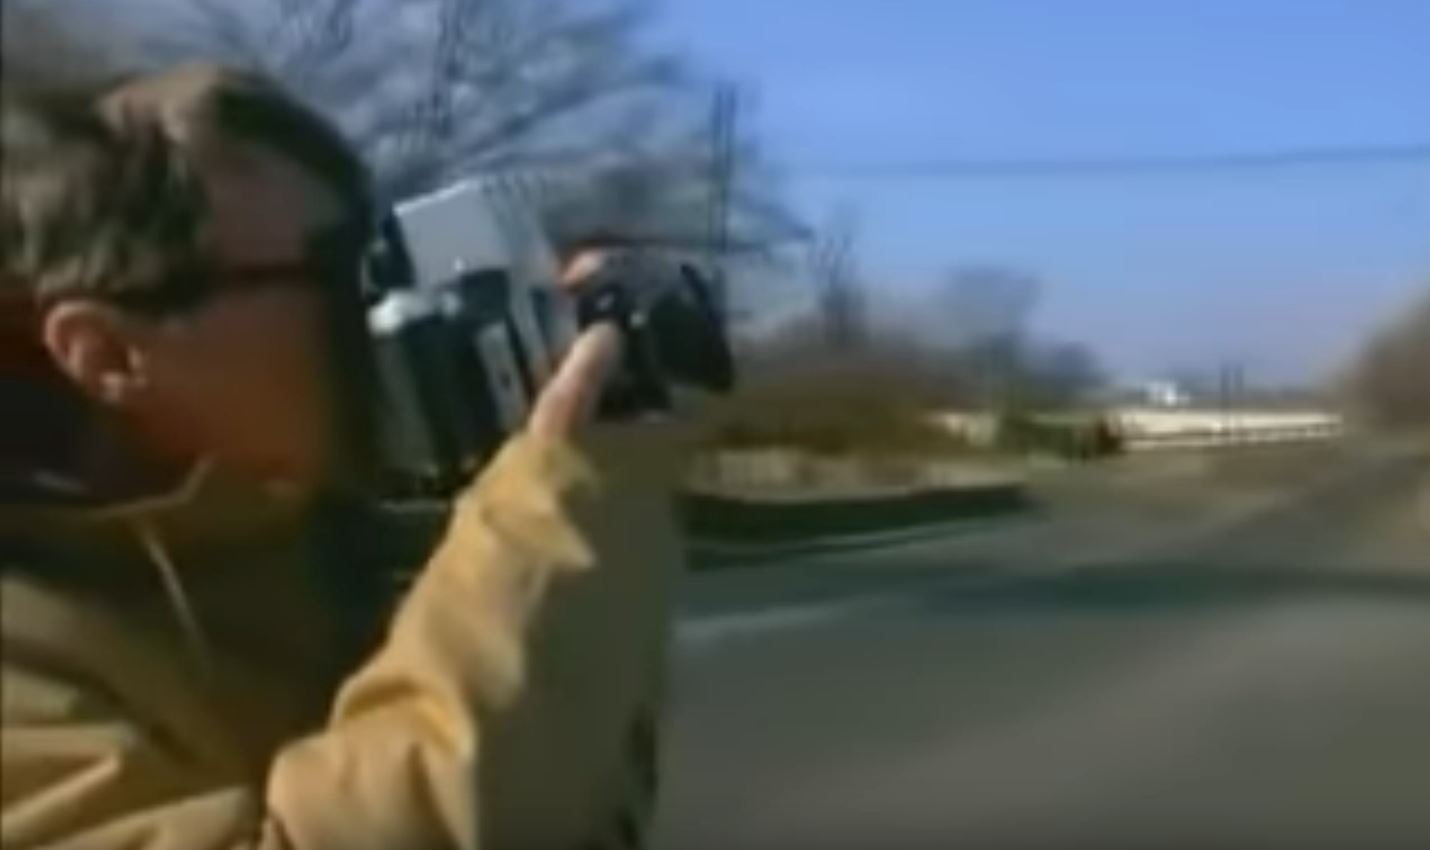 screen grab from William Eggleston street photography documentary